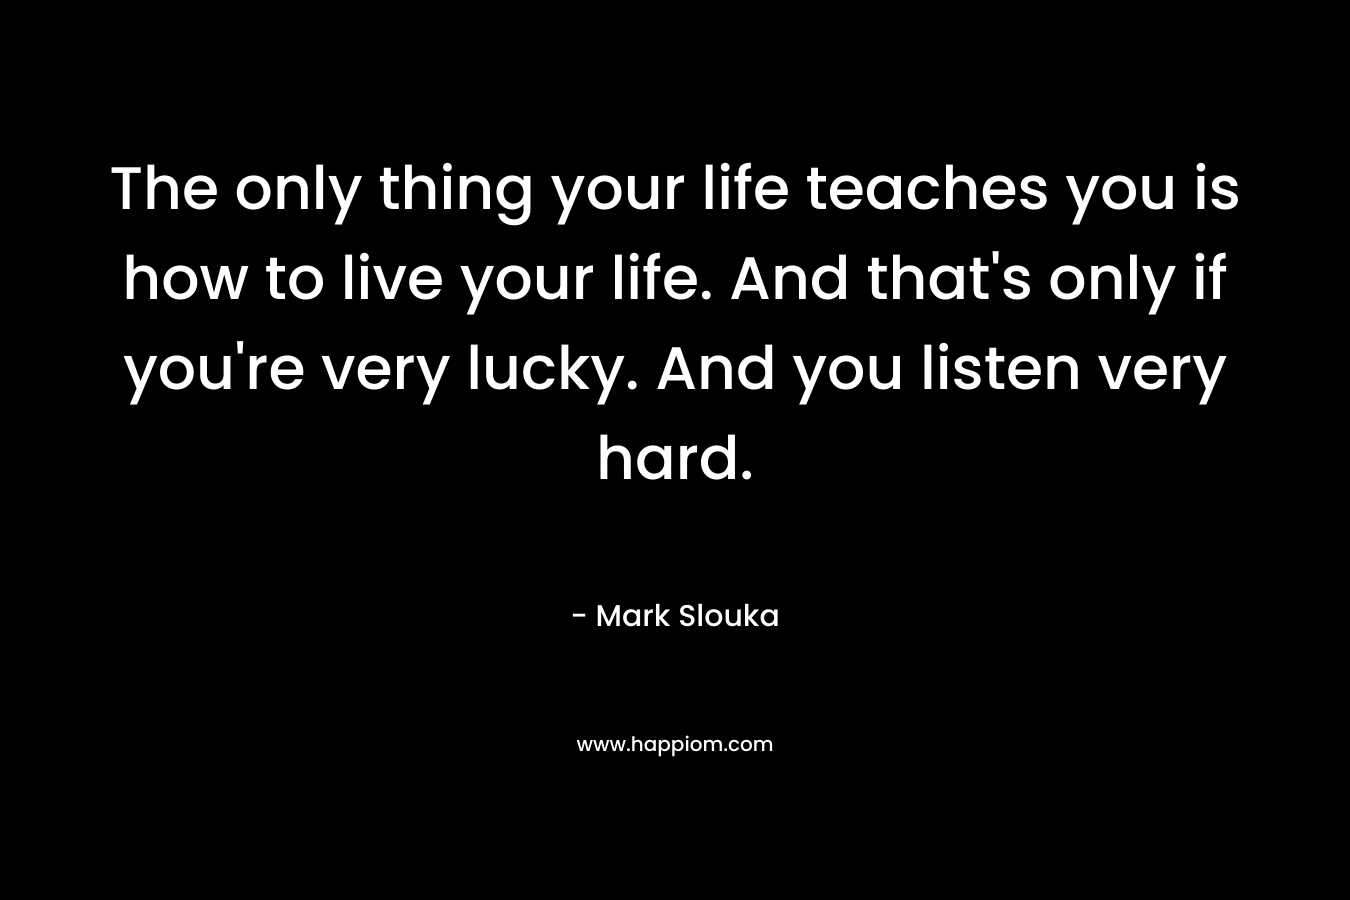 The only thing your life teaches you is how to live your life. And that's only if you're very lucky. And you listen very hard.